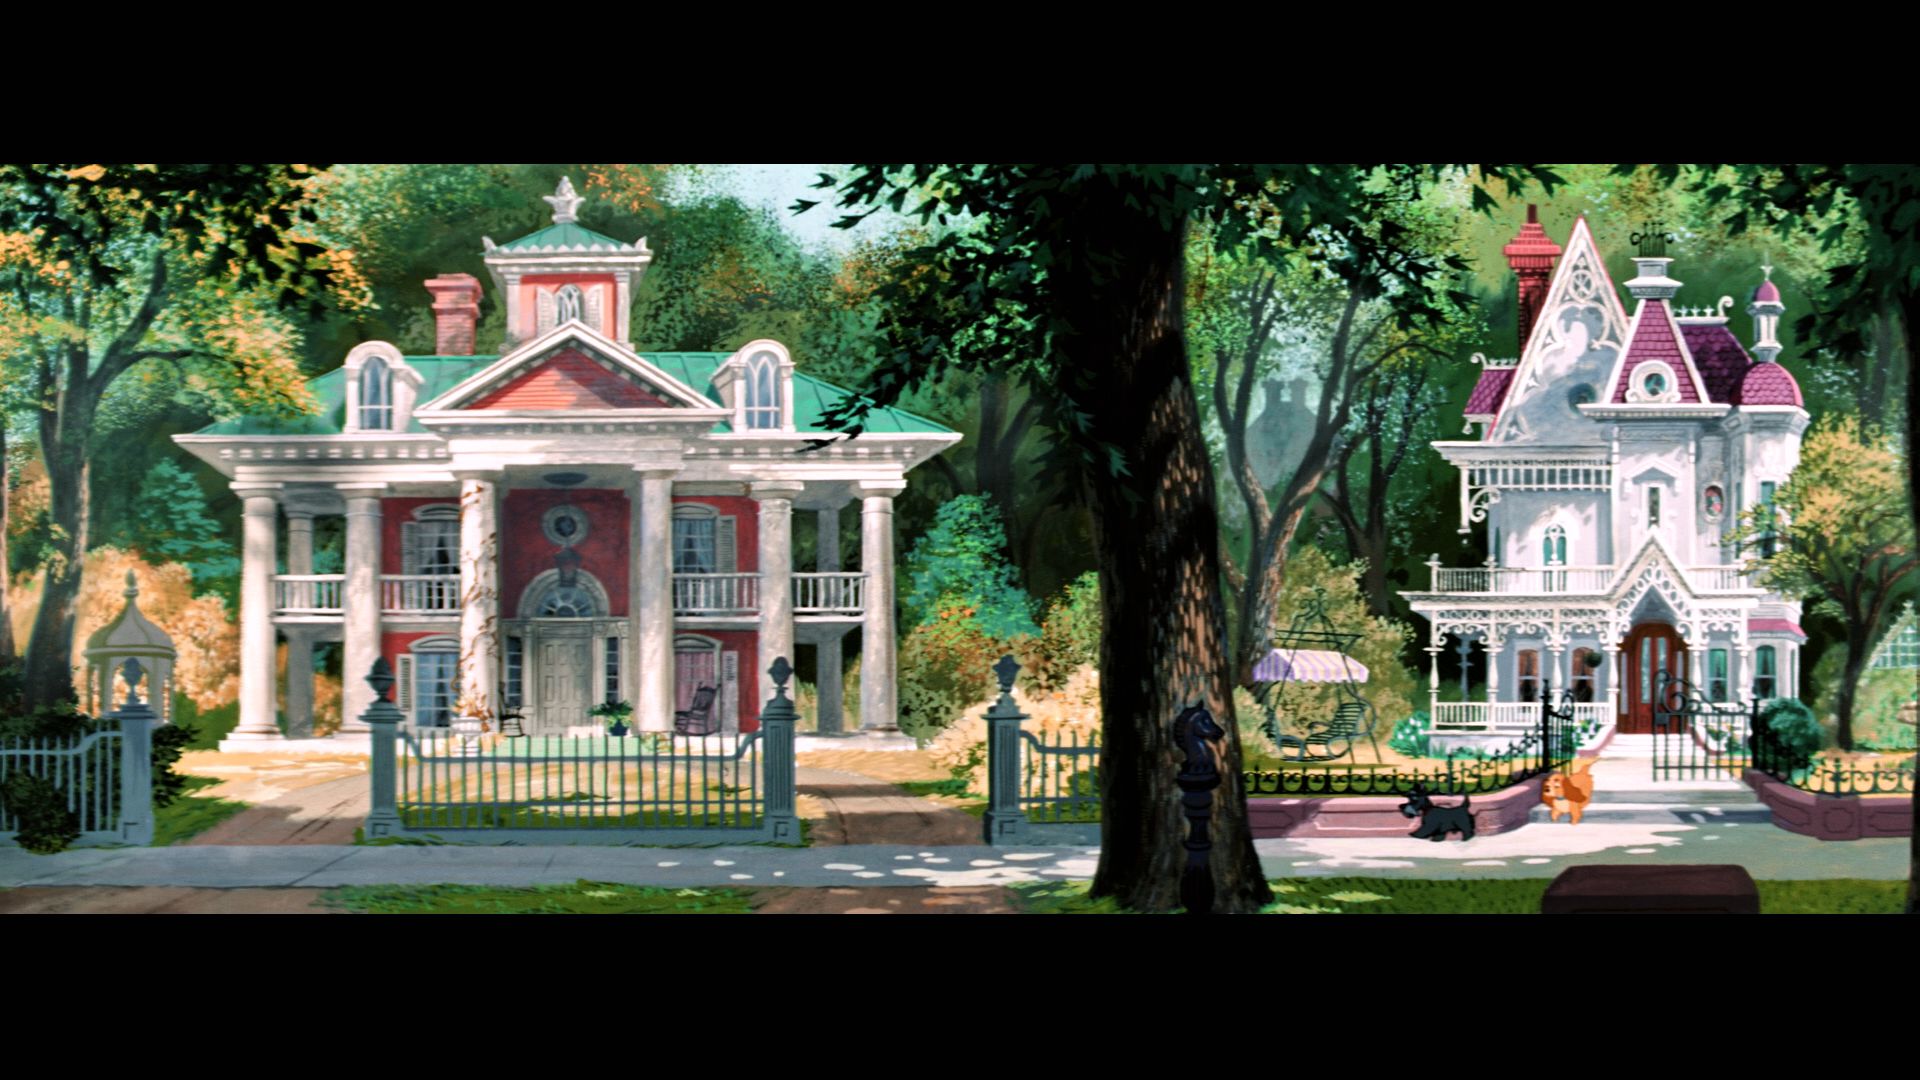 movie, lady and the tramp (1955), colorful, house, lady and the tramp, street